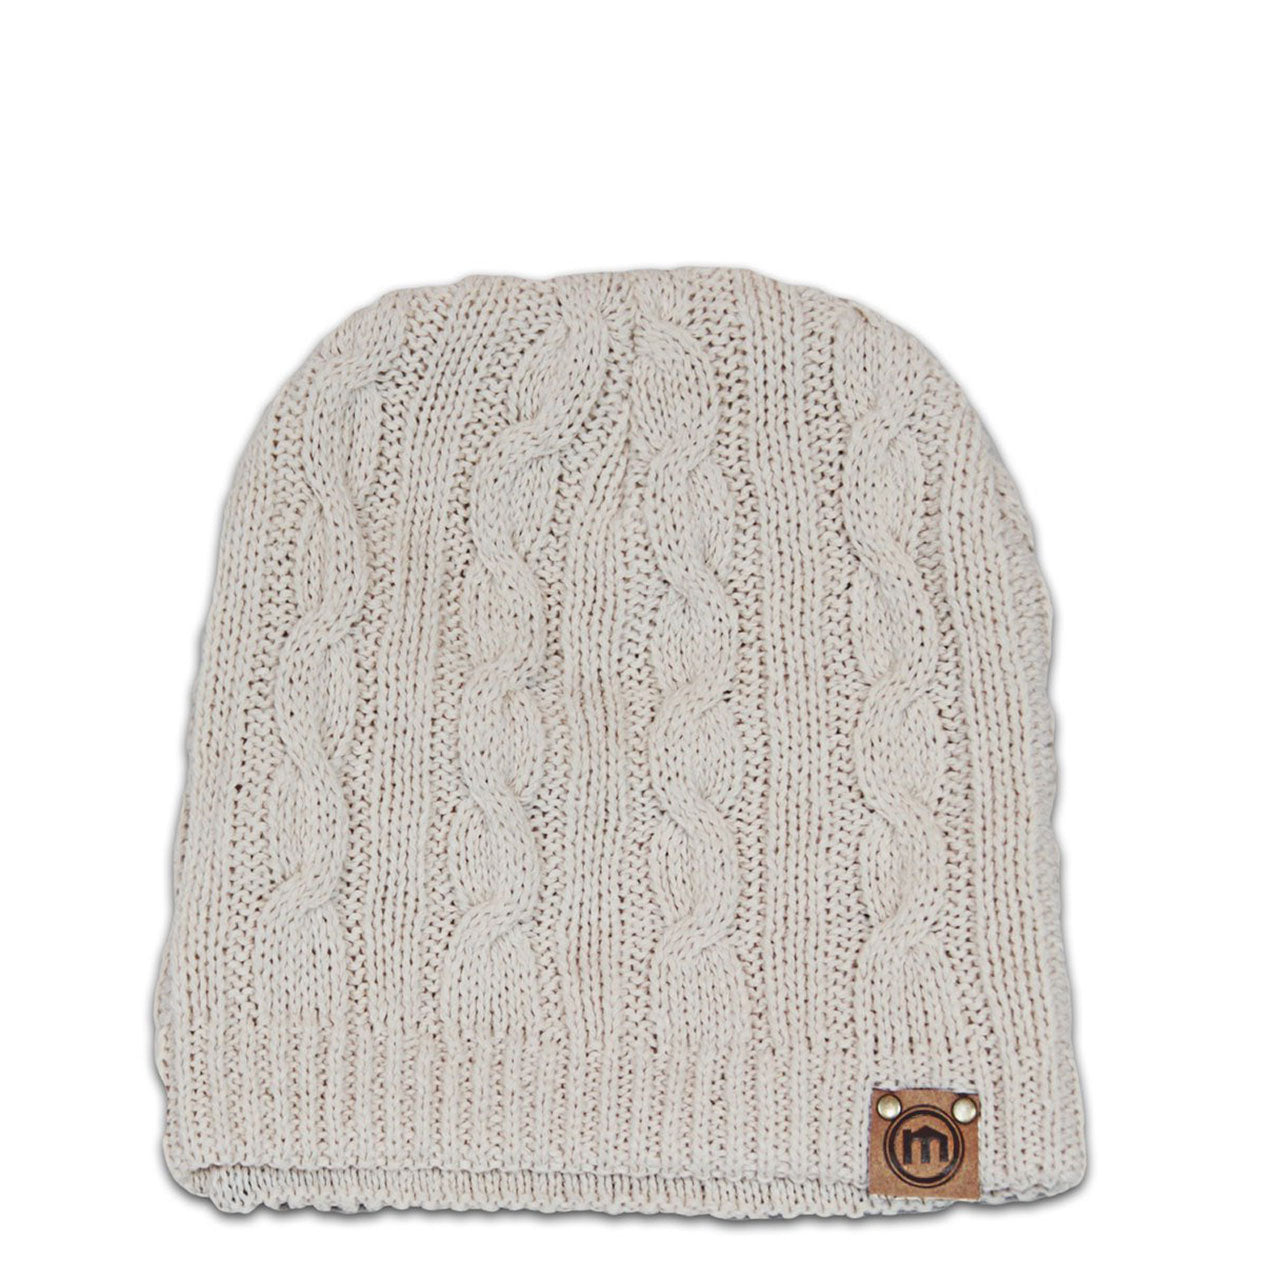 Womens Beanies - Mitscoots Outfitters